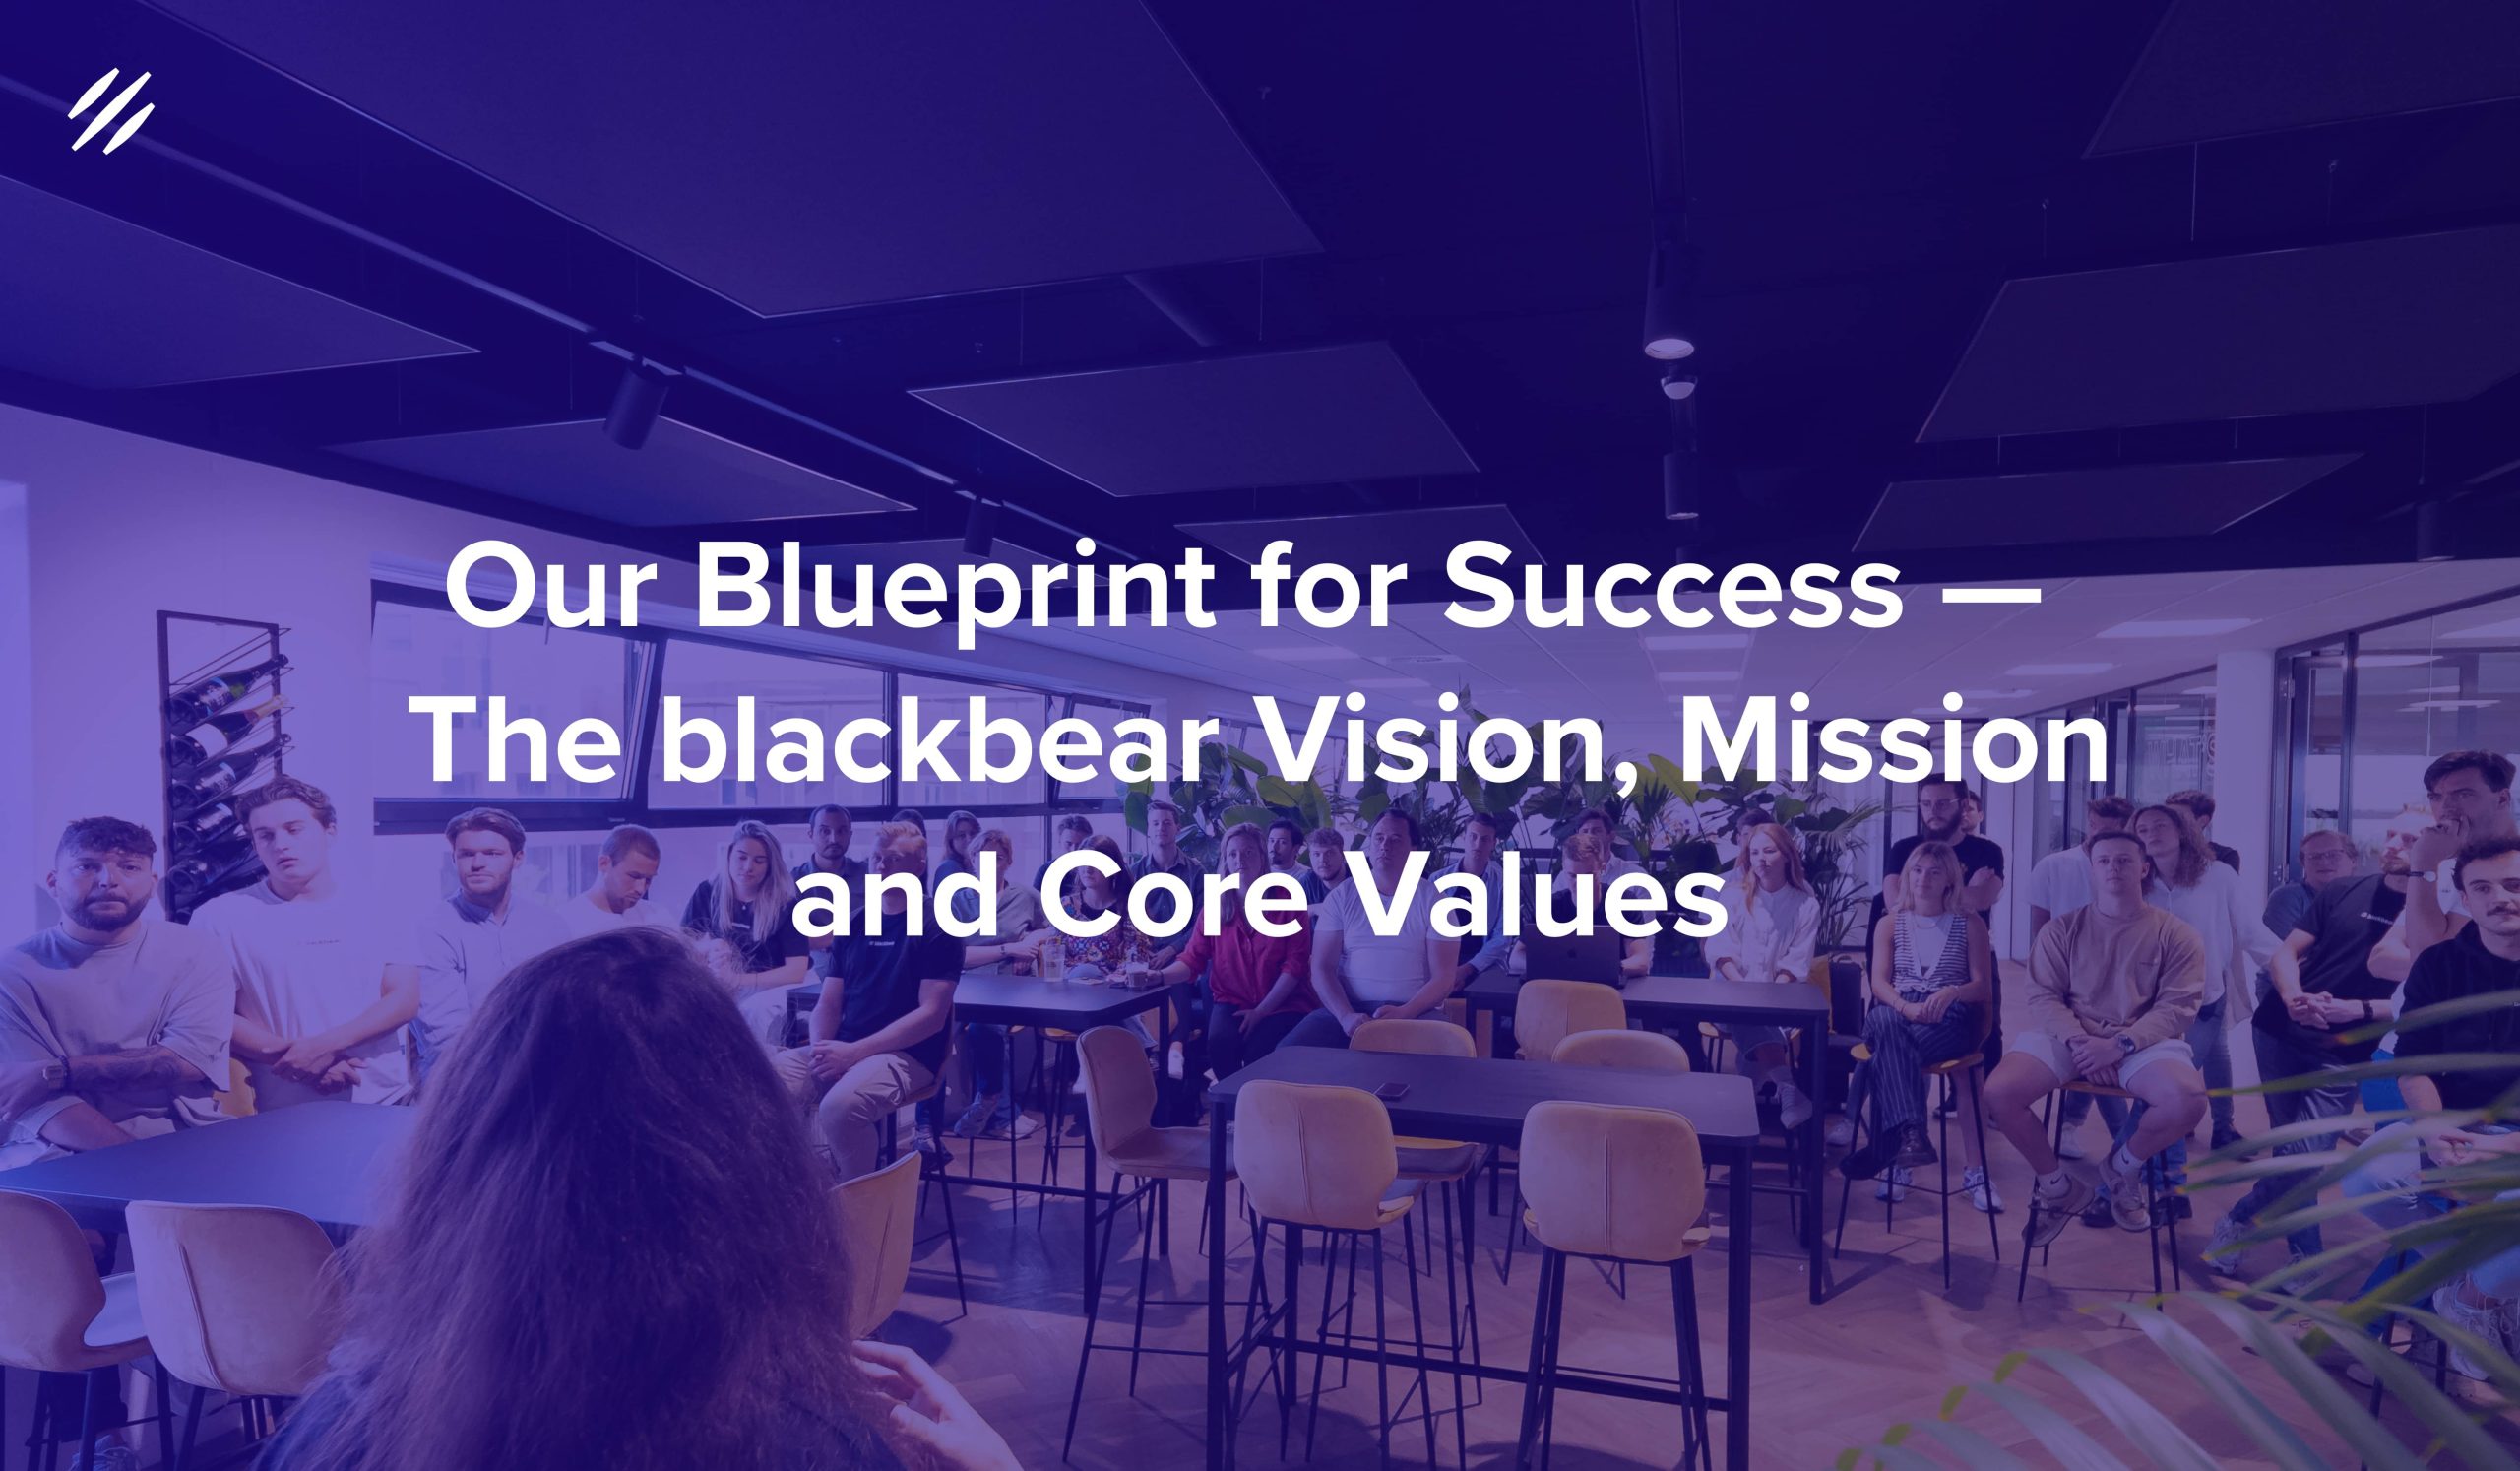 Our Blueprint for Success — The blackbear Vision, Mission and Core Values